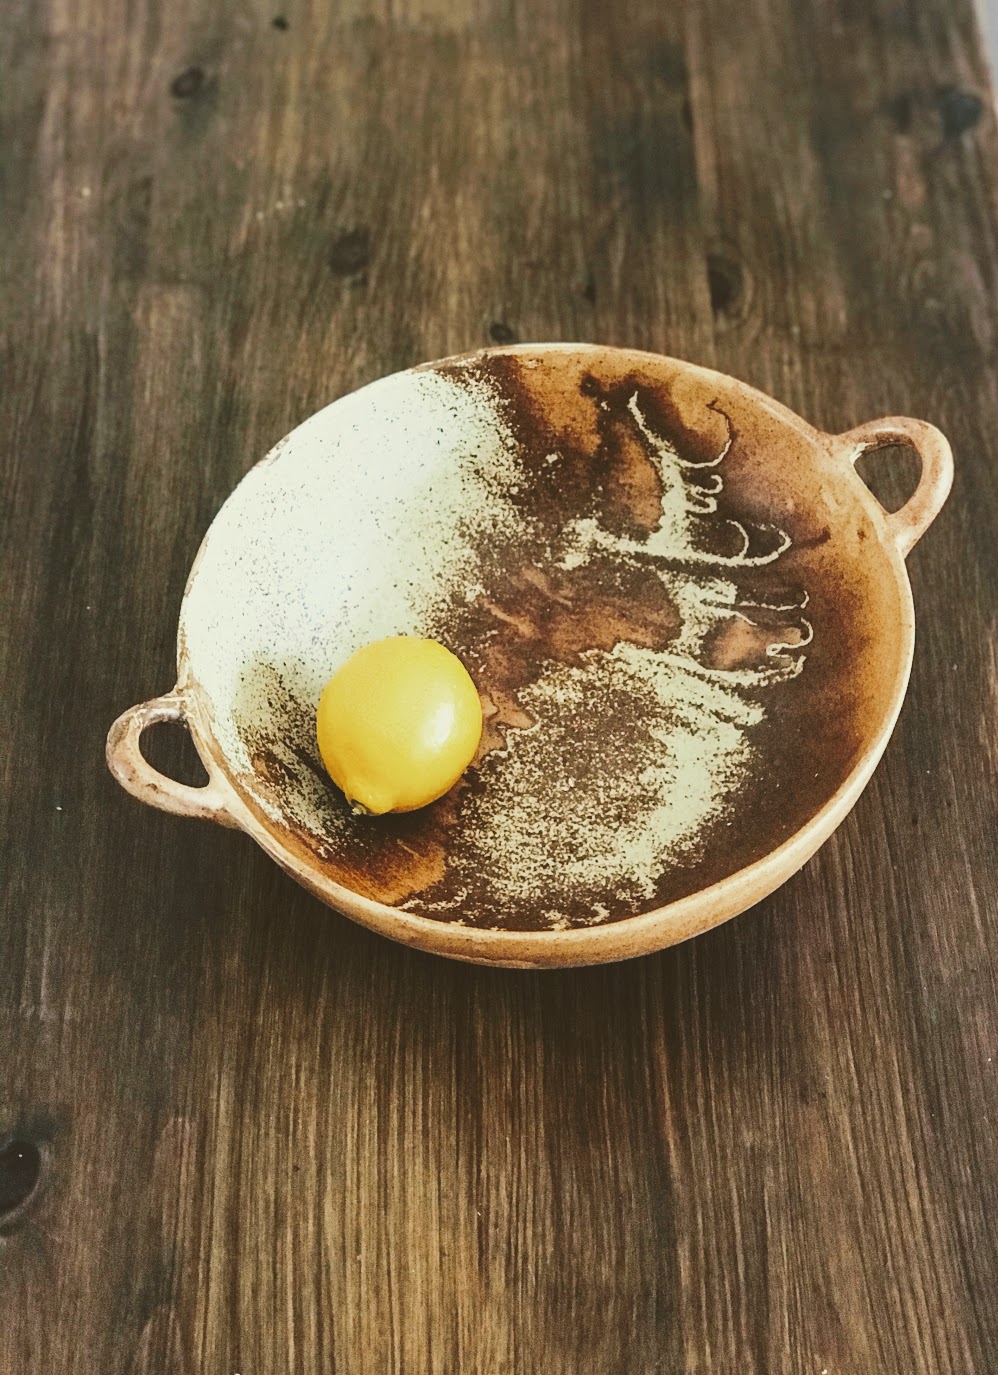 Lemon in Bowl. Photo by author